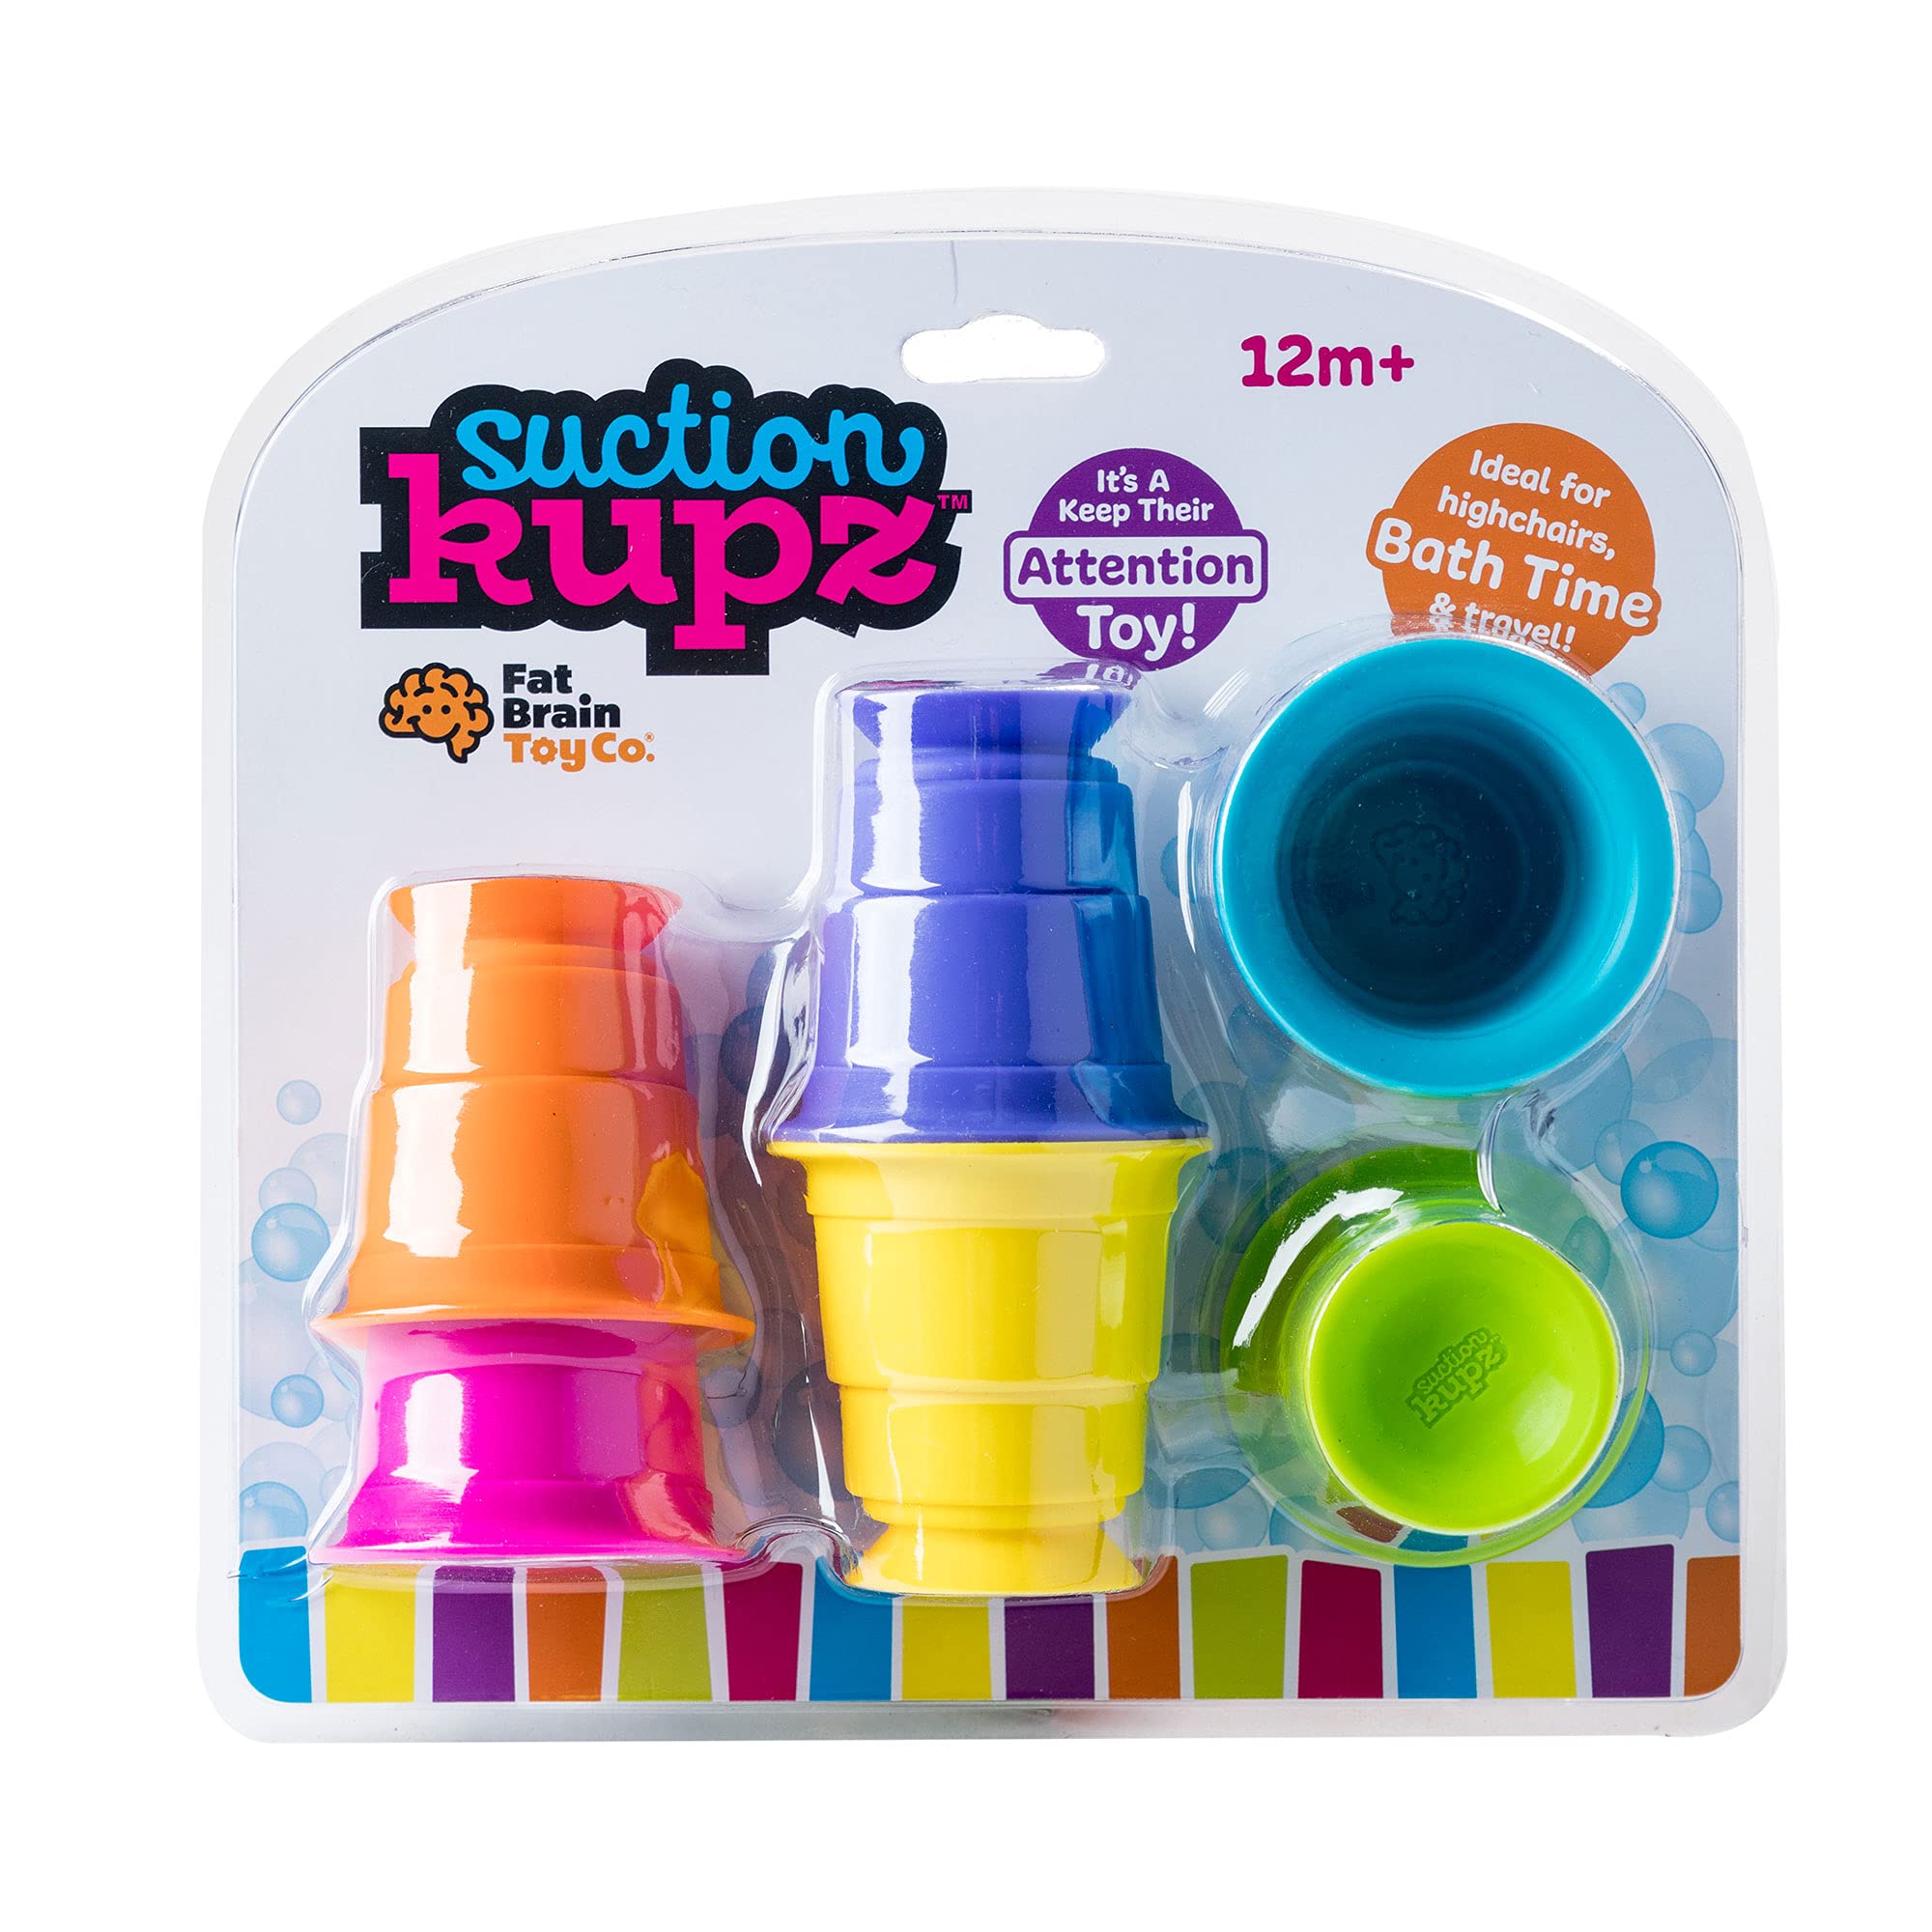 Fat Brain Toys FA183-1 Suction Kupz Baby Toys & Gifts for Ages 1 To 2, Multicolor